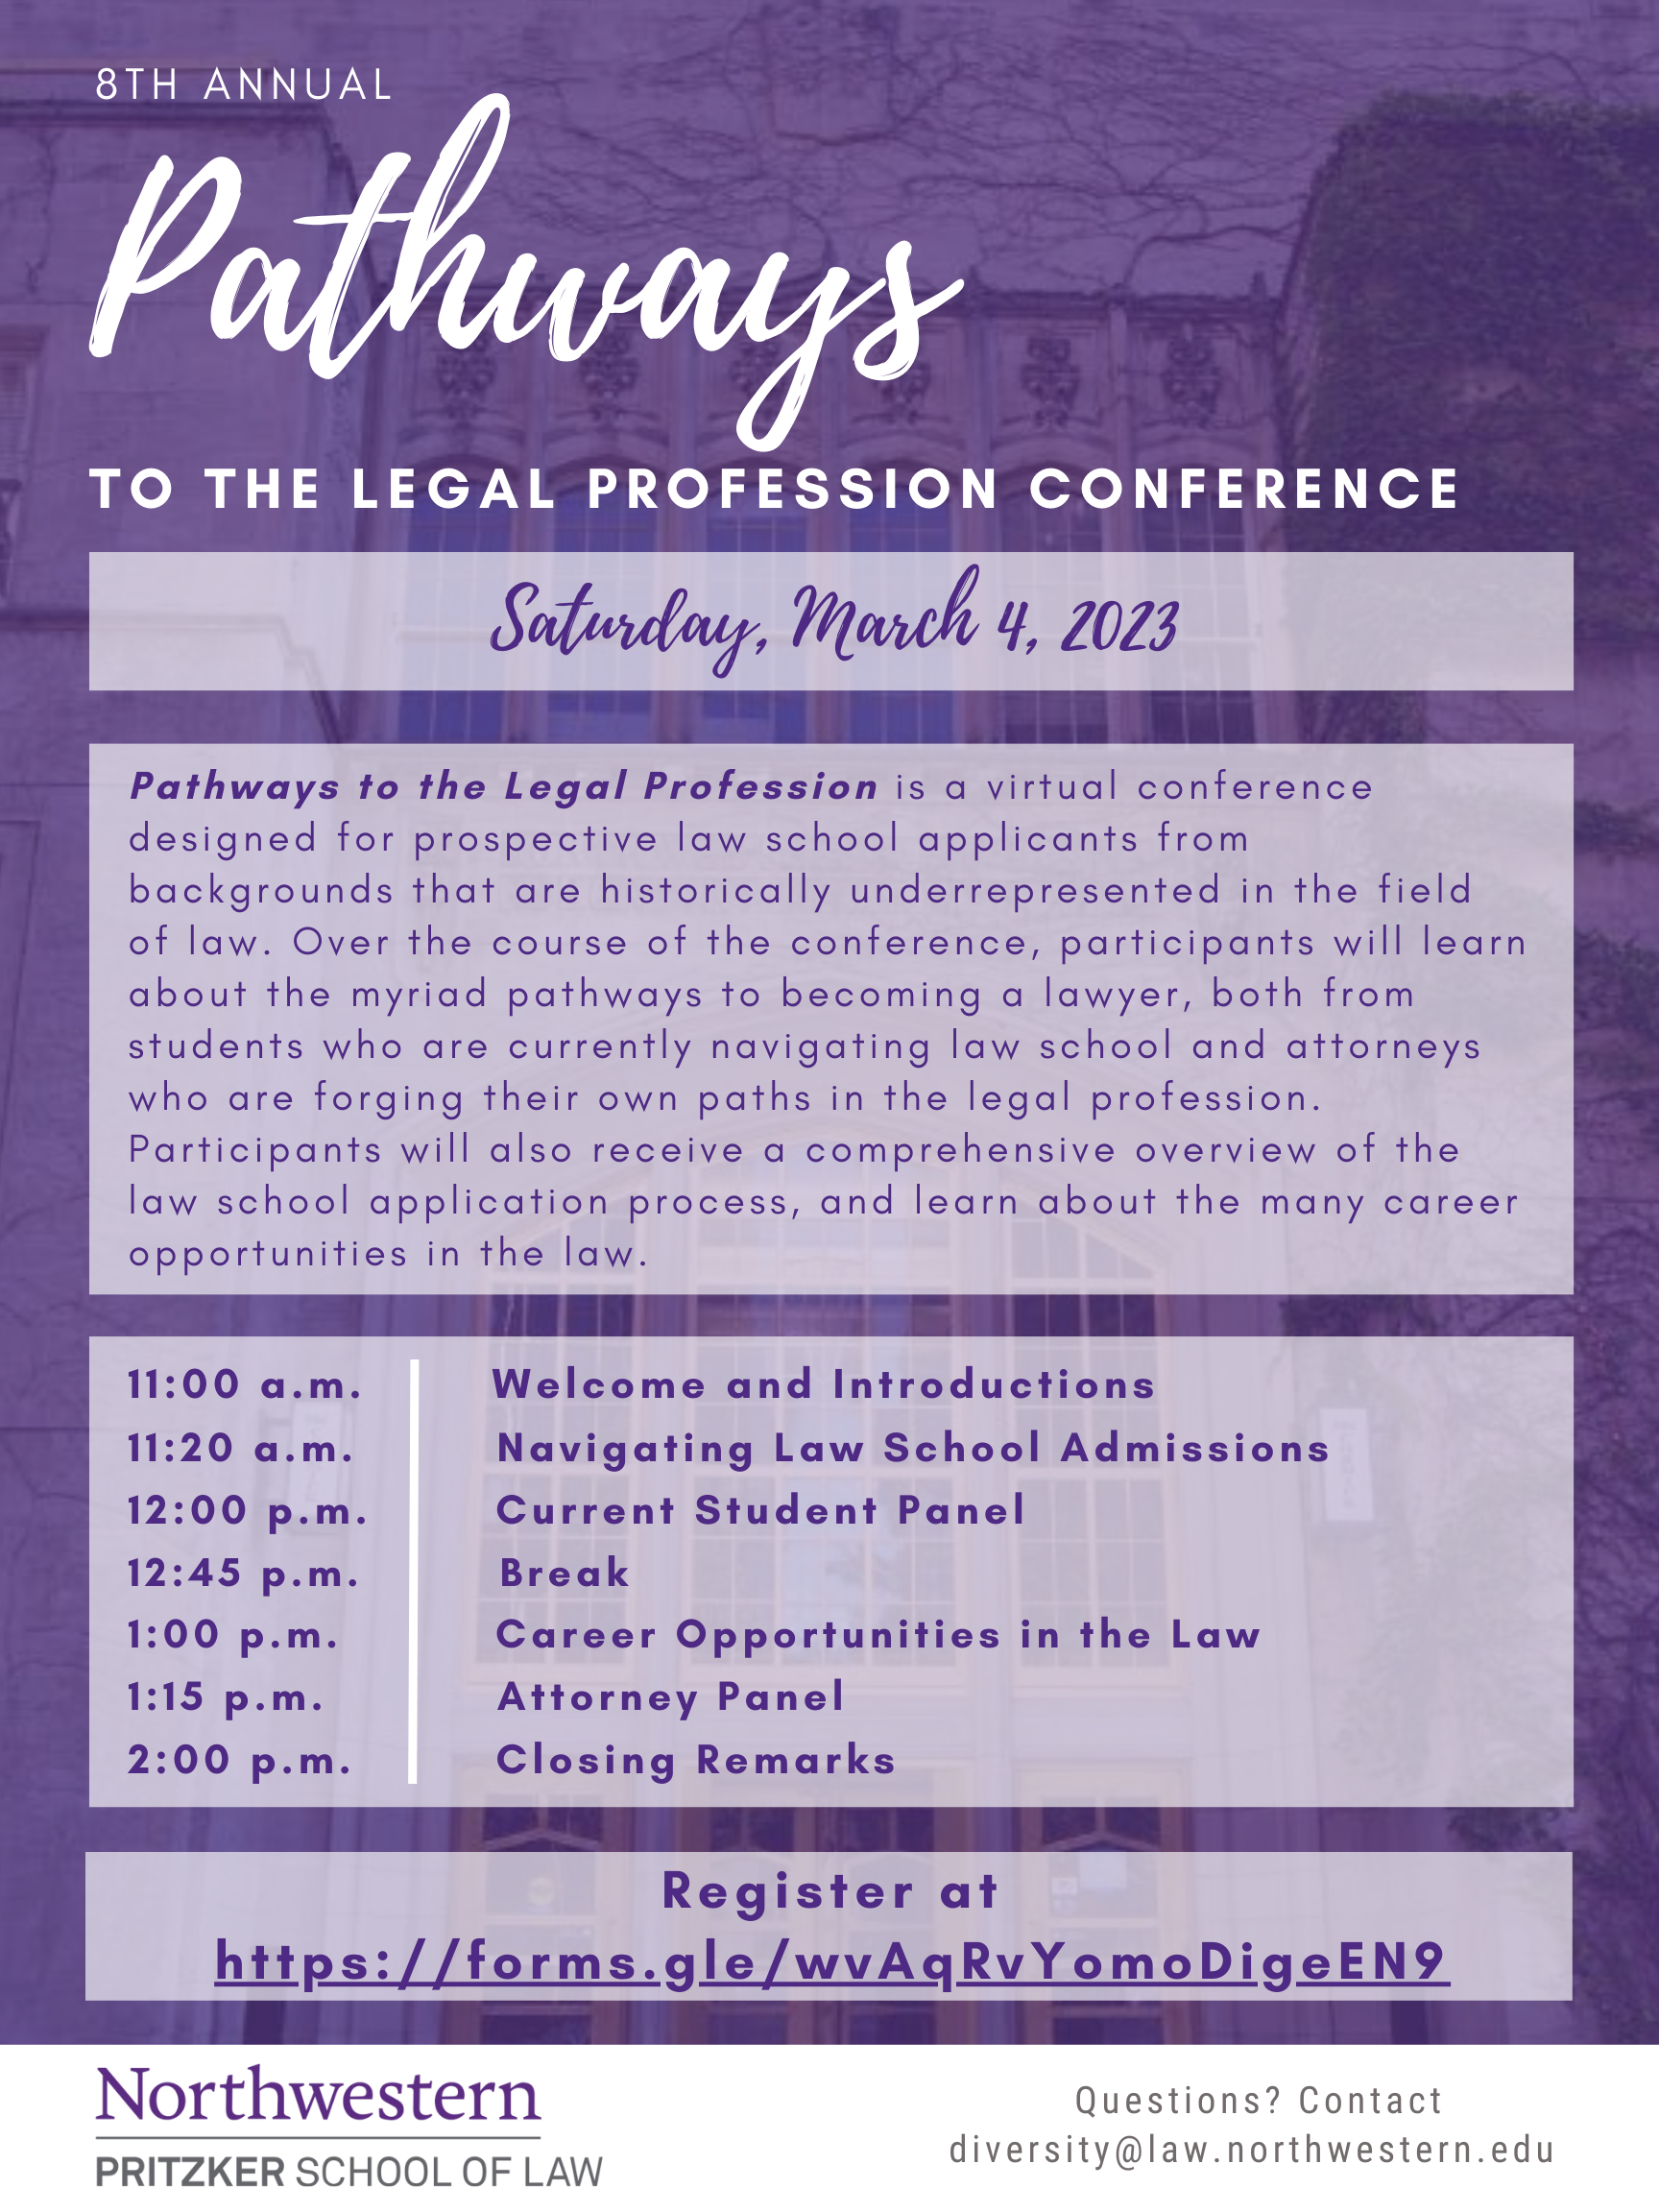 8th Annual Pathways Conference